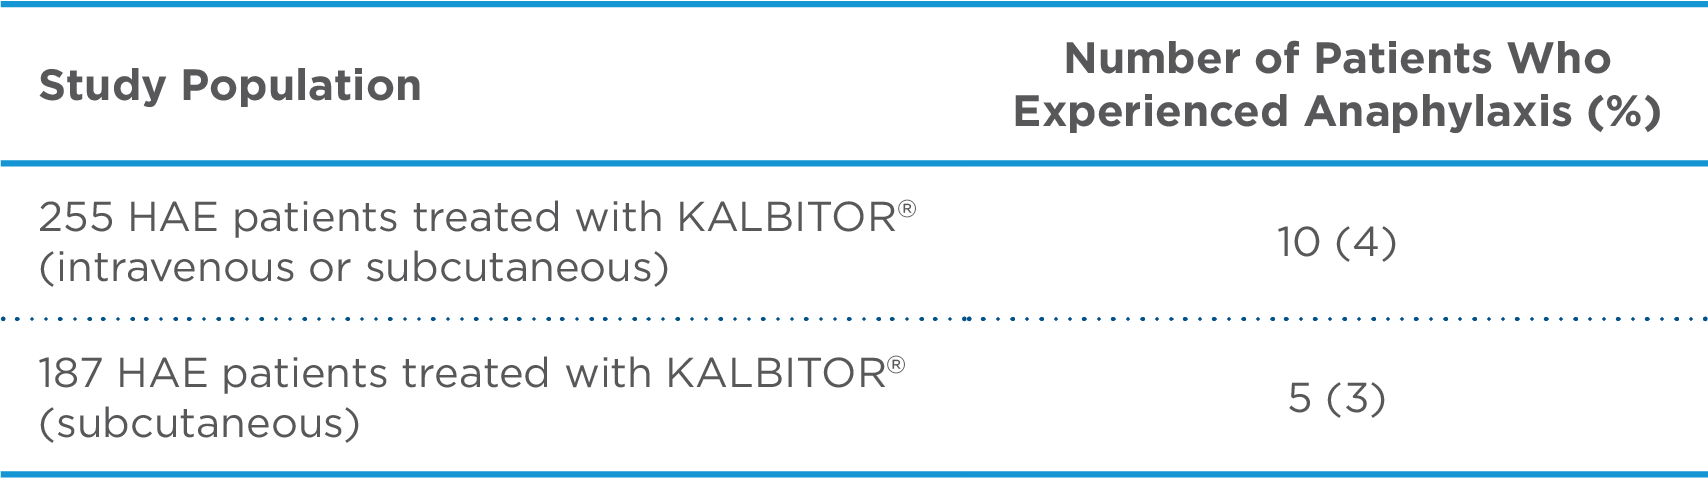 Out of 255 HAE patients treated with KALBITOR (intravenous or subcutaneous), 10 experienced anaphylaxis. Out of 187 HAE patients treated with KALBITOR (subcutaneous), 5 experienced anaphylaxis.